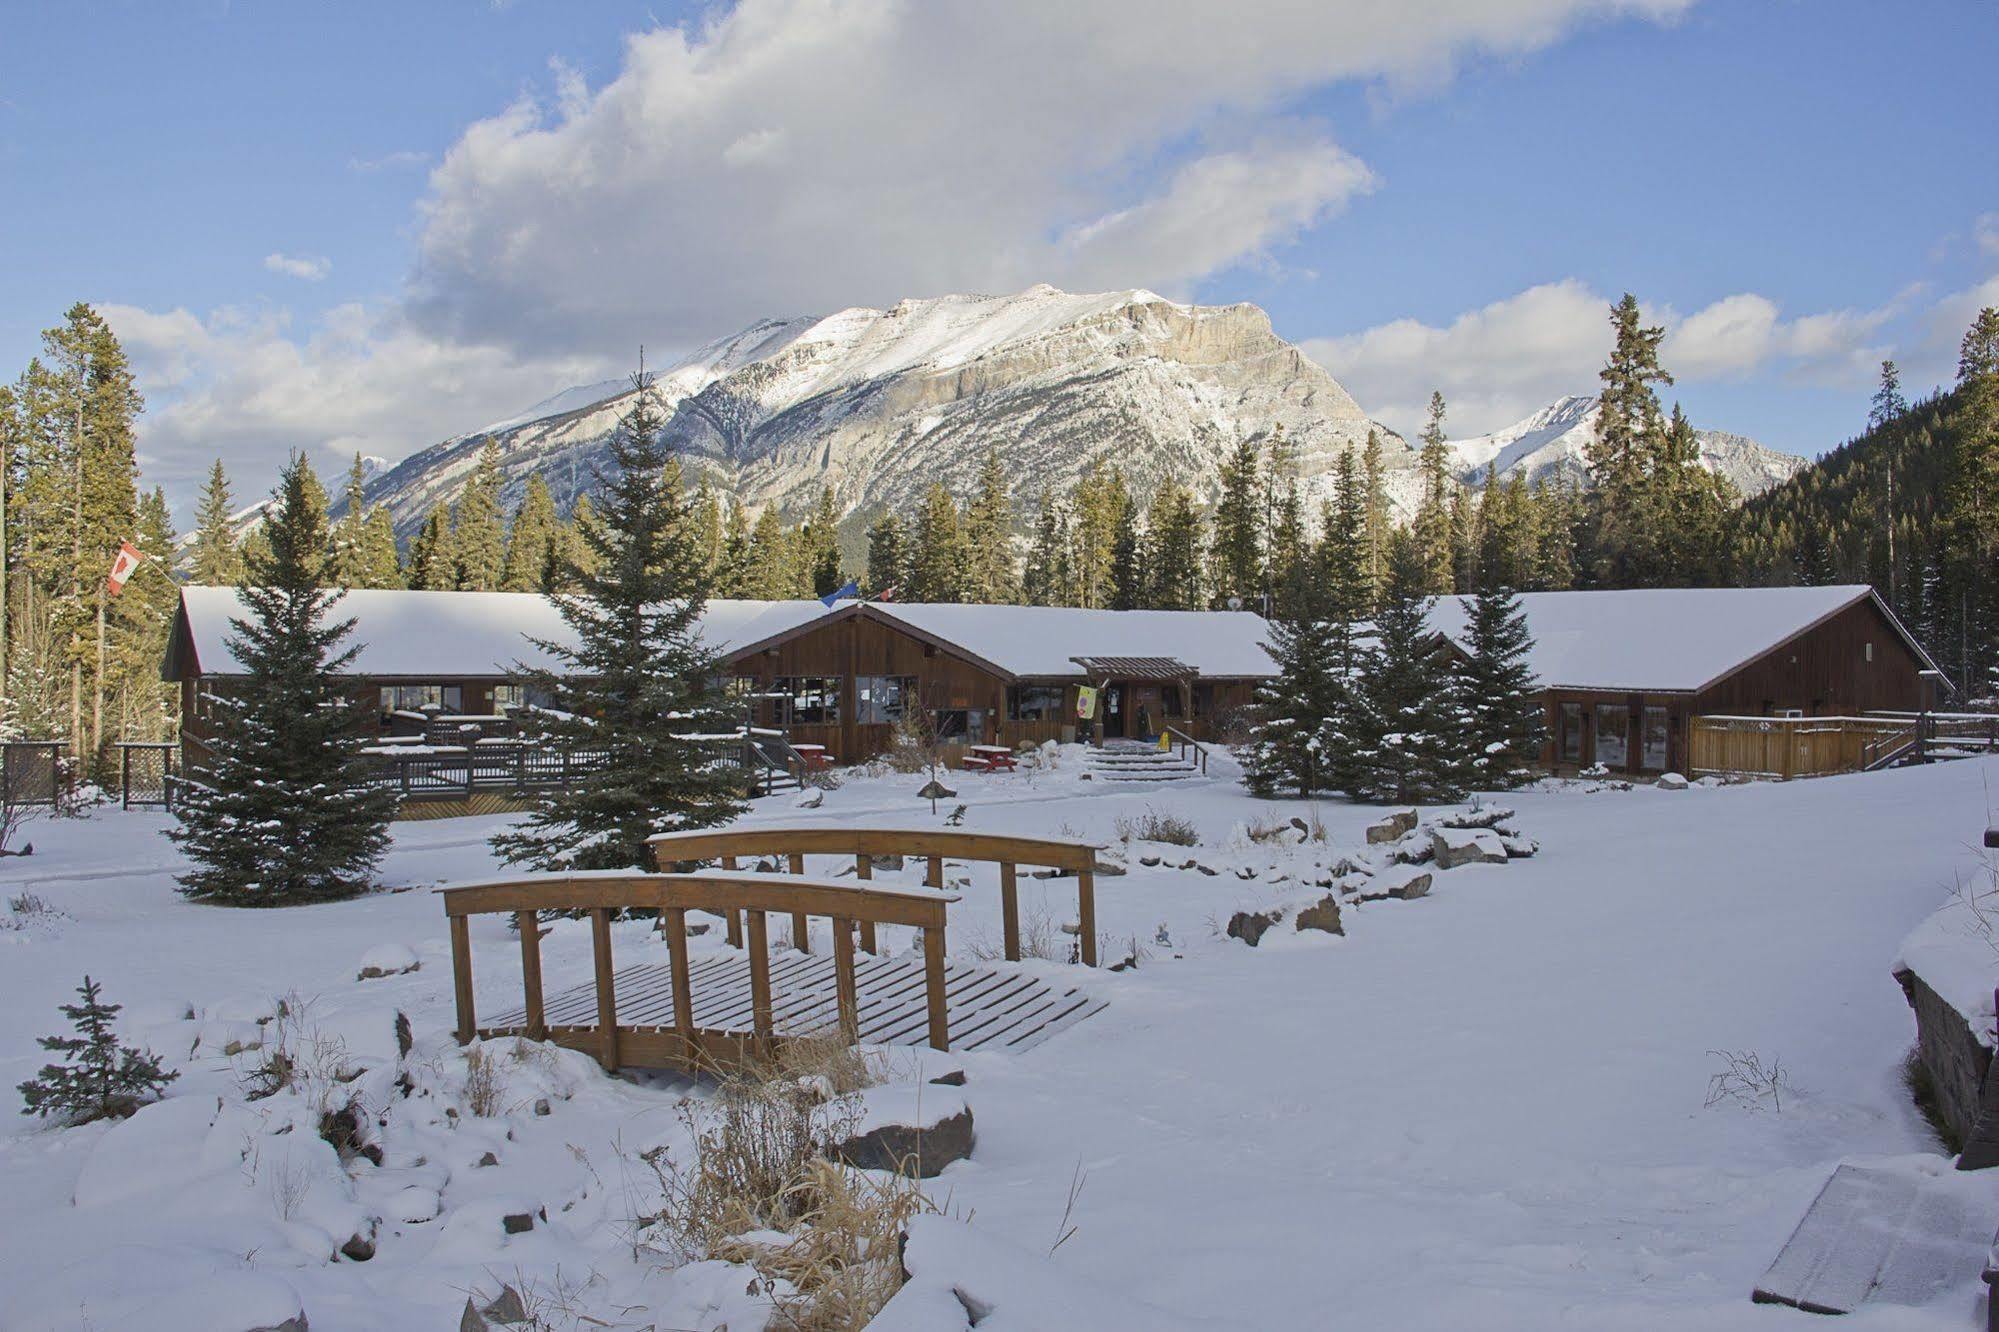 Banff Gate Mountain Resort Canmore Extérieur photo